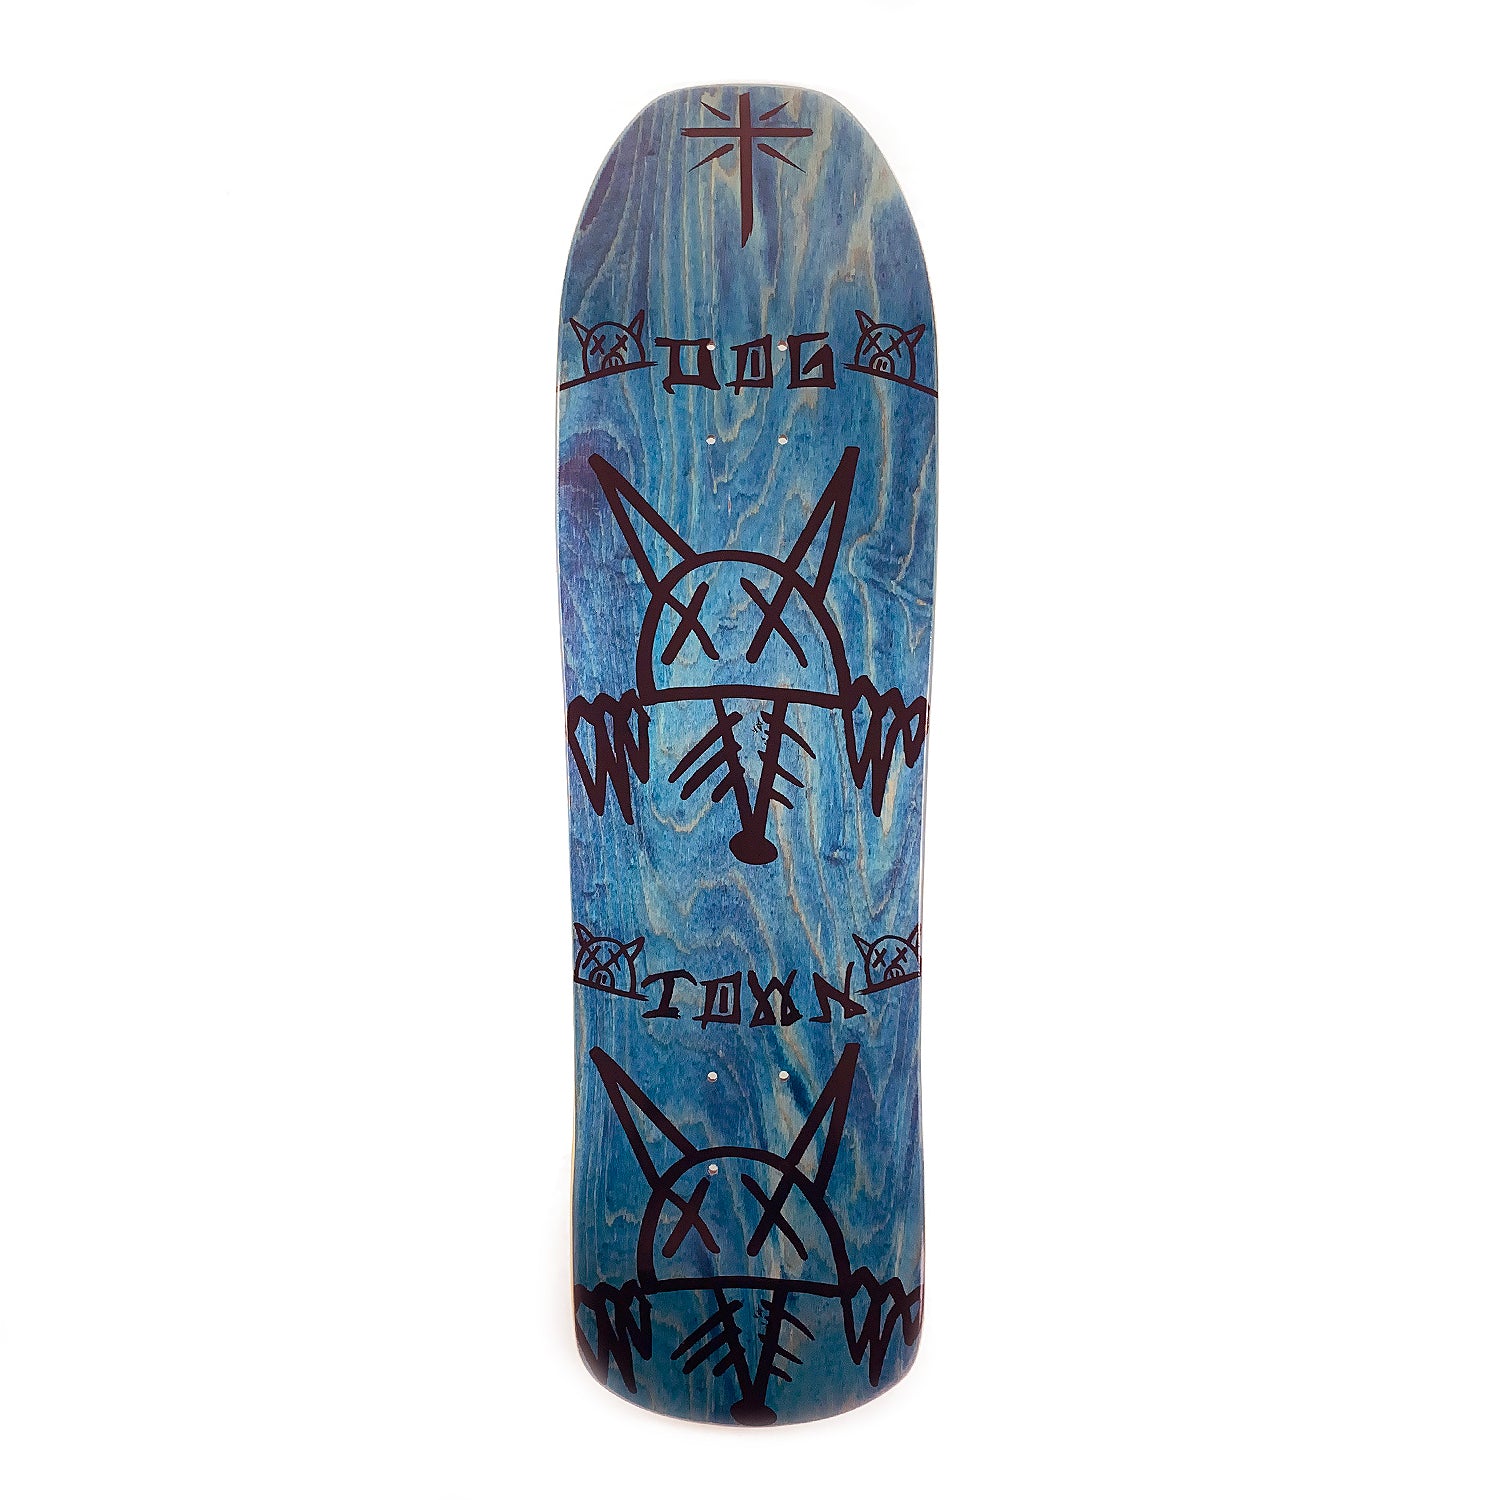 Dog Town 8.875" Rat Face M80 Shaped Deck - Blue Stain - Prime Delux Store